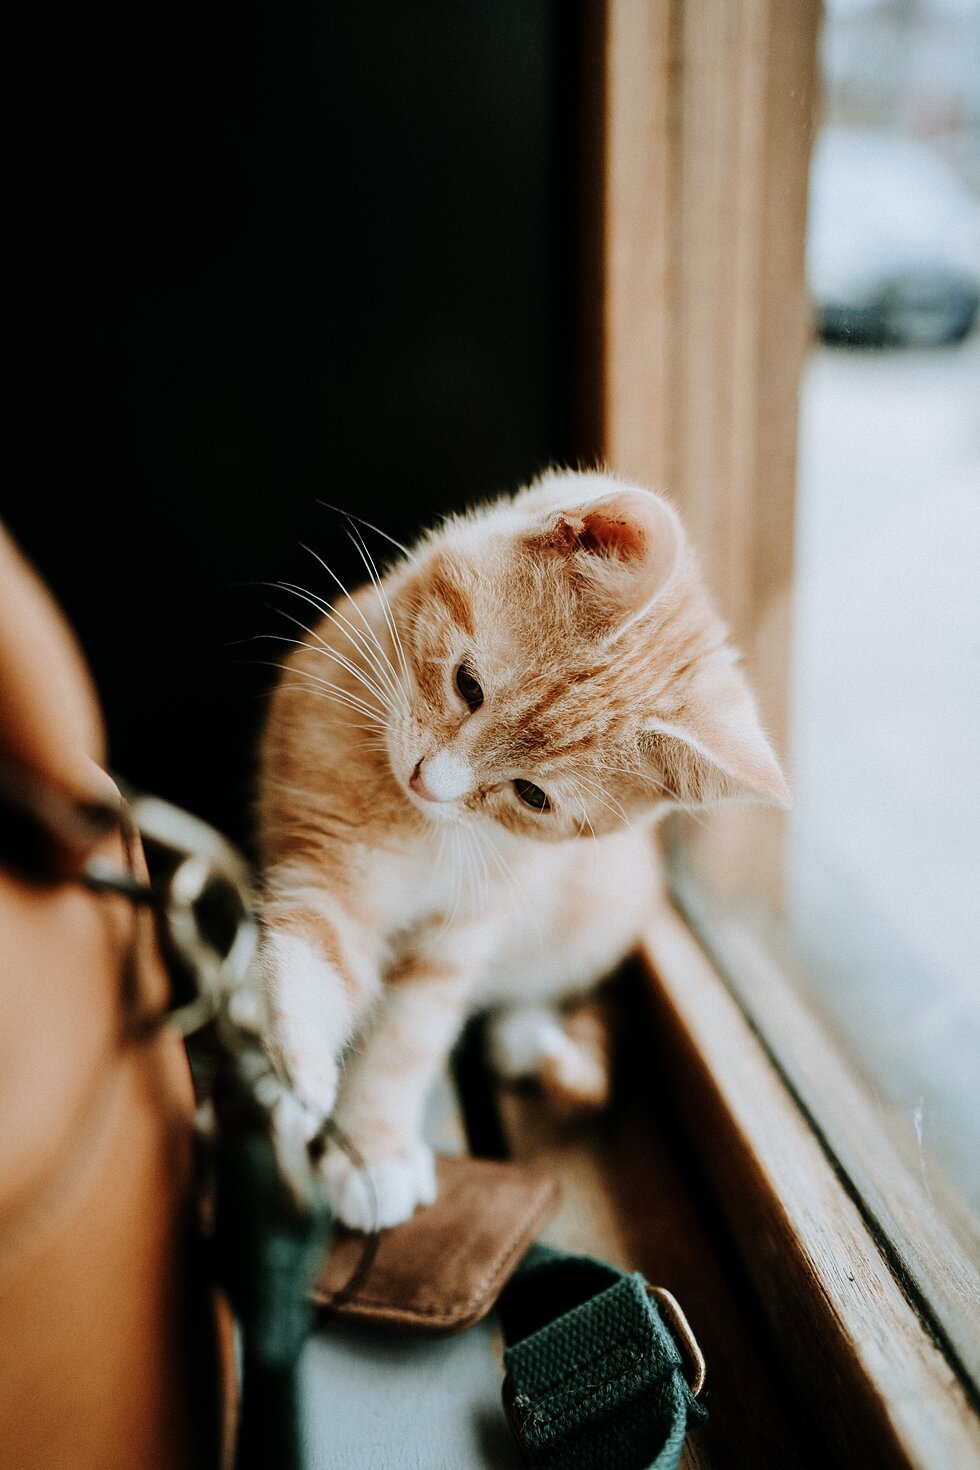  Sweet kittens waiting for people to come play with them at The Purrfect Day Cafe! #engagementgoals #proposalphotographer #engaged #photographedengagement #kentuckyphotographer #indianaphotographer #louisvillephotographer #proposalphotos #savethedate